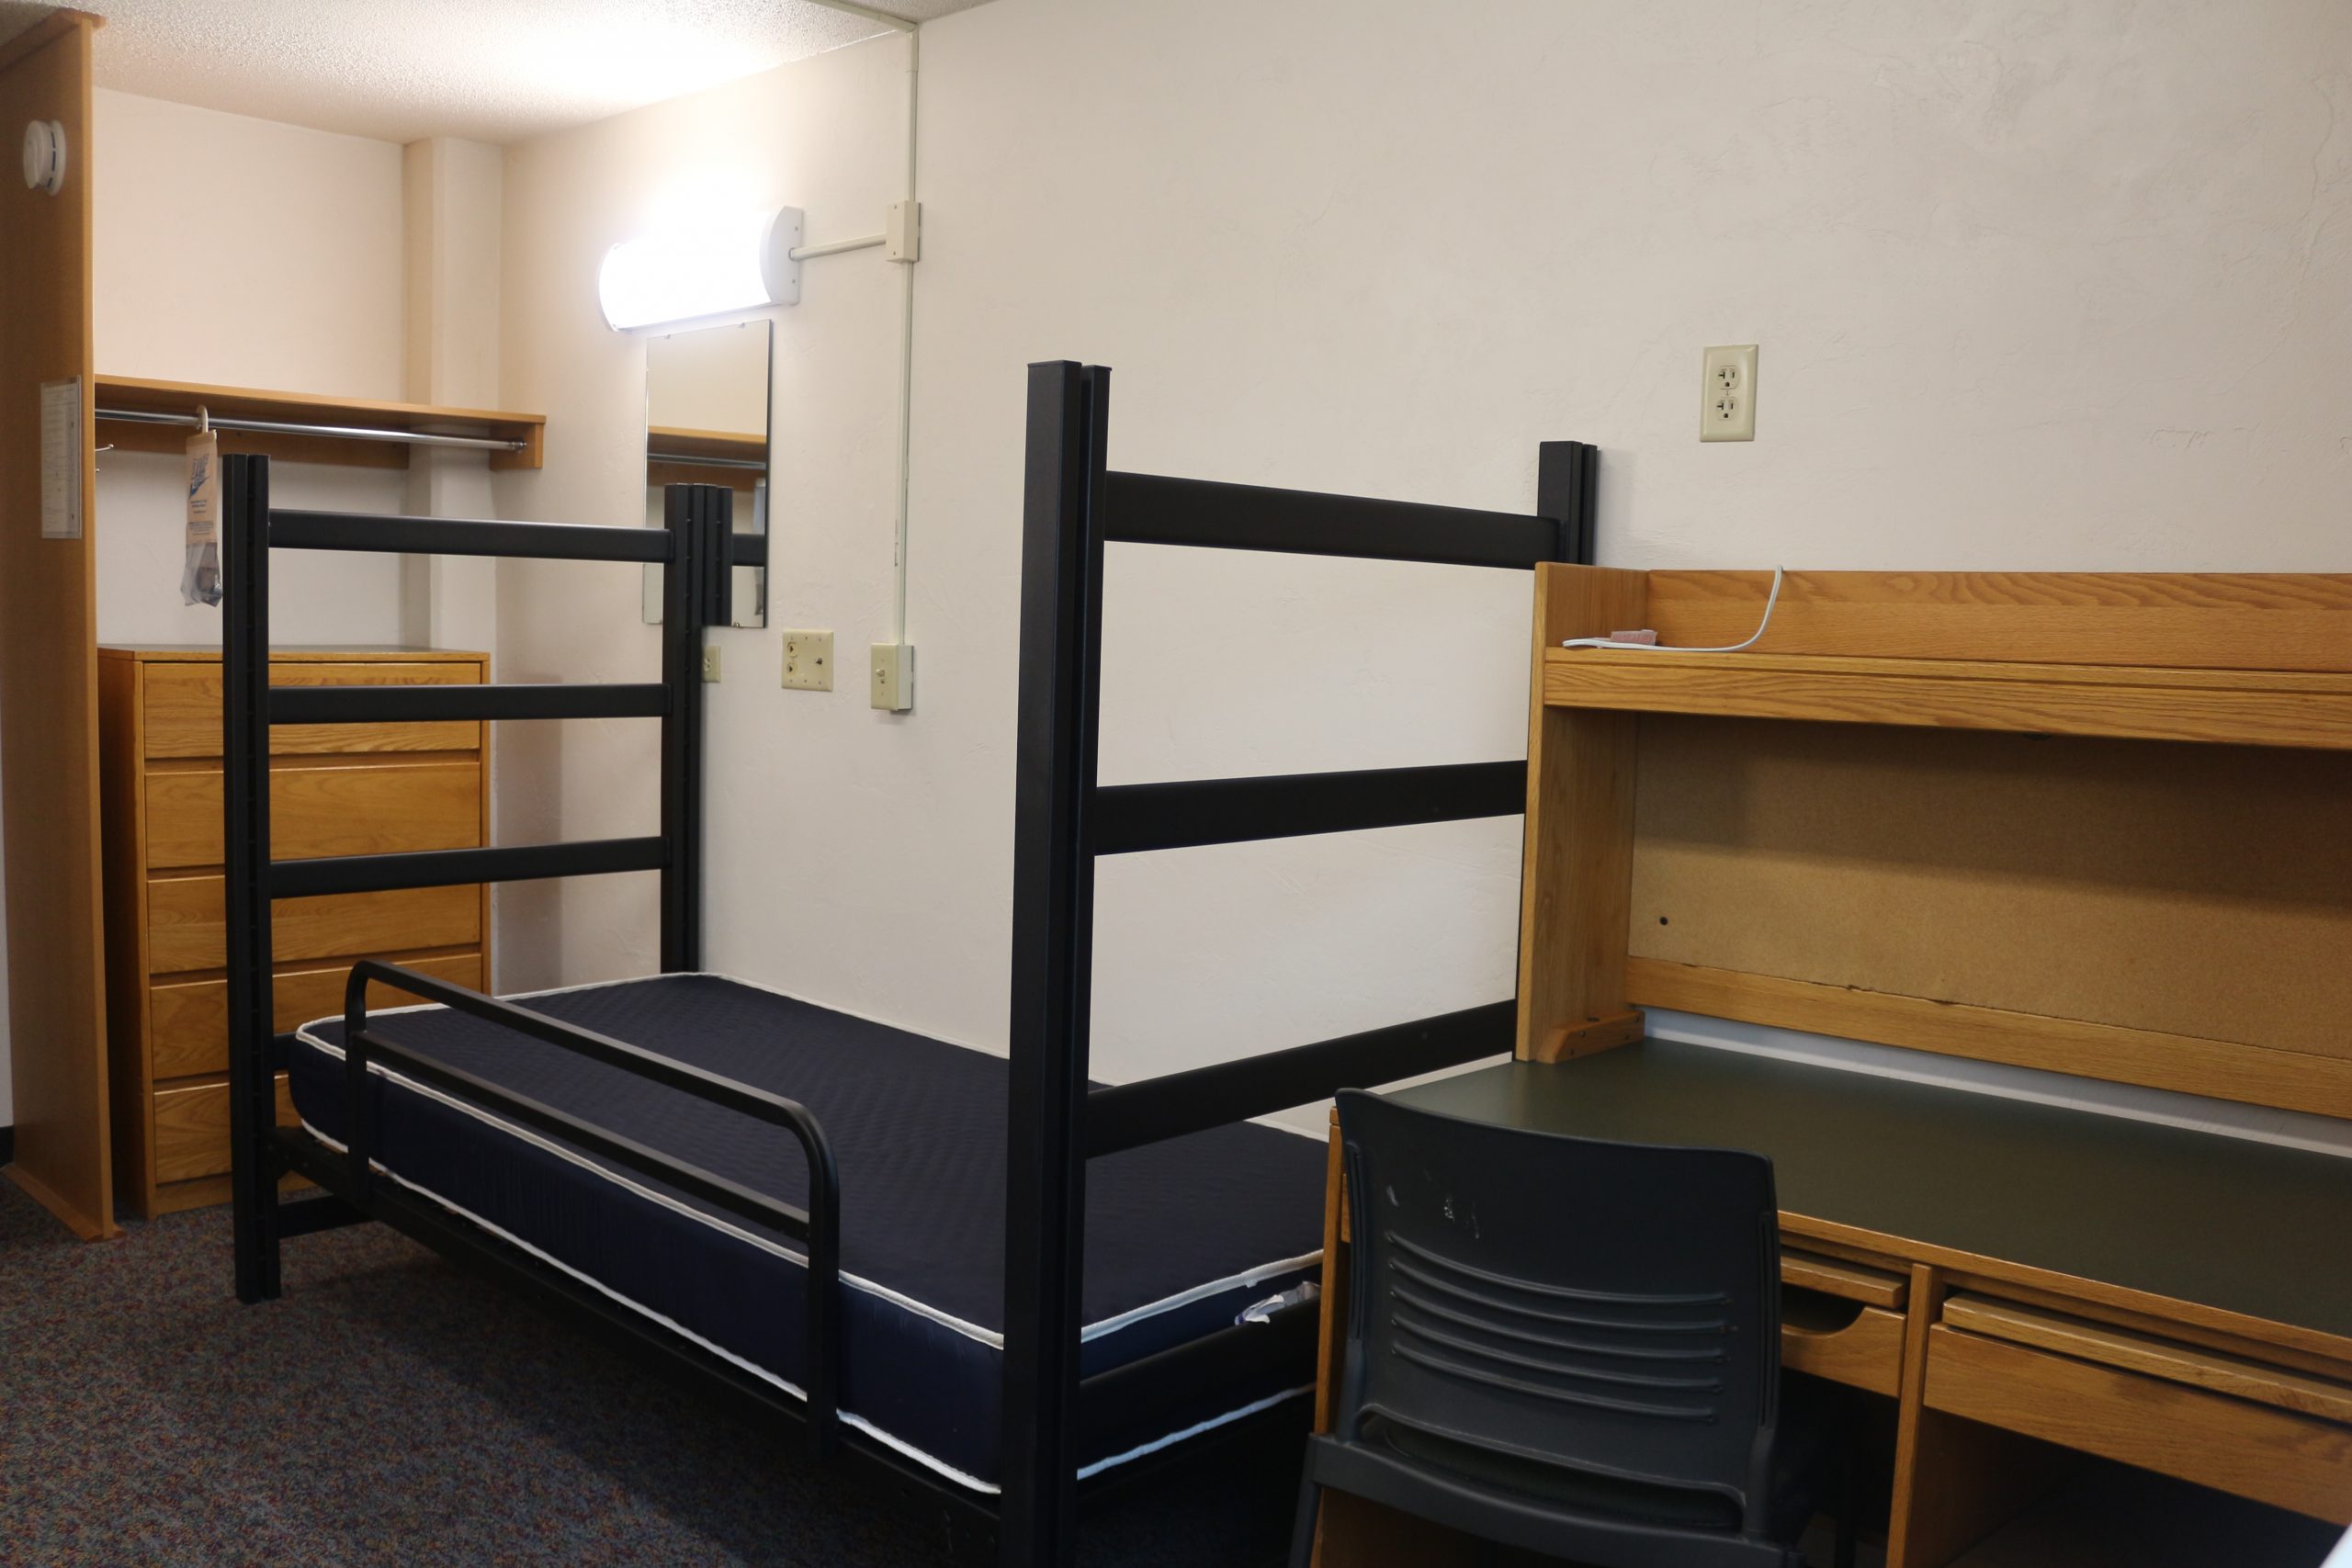 Room showing bed and desk